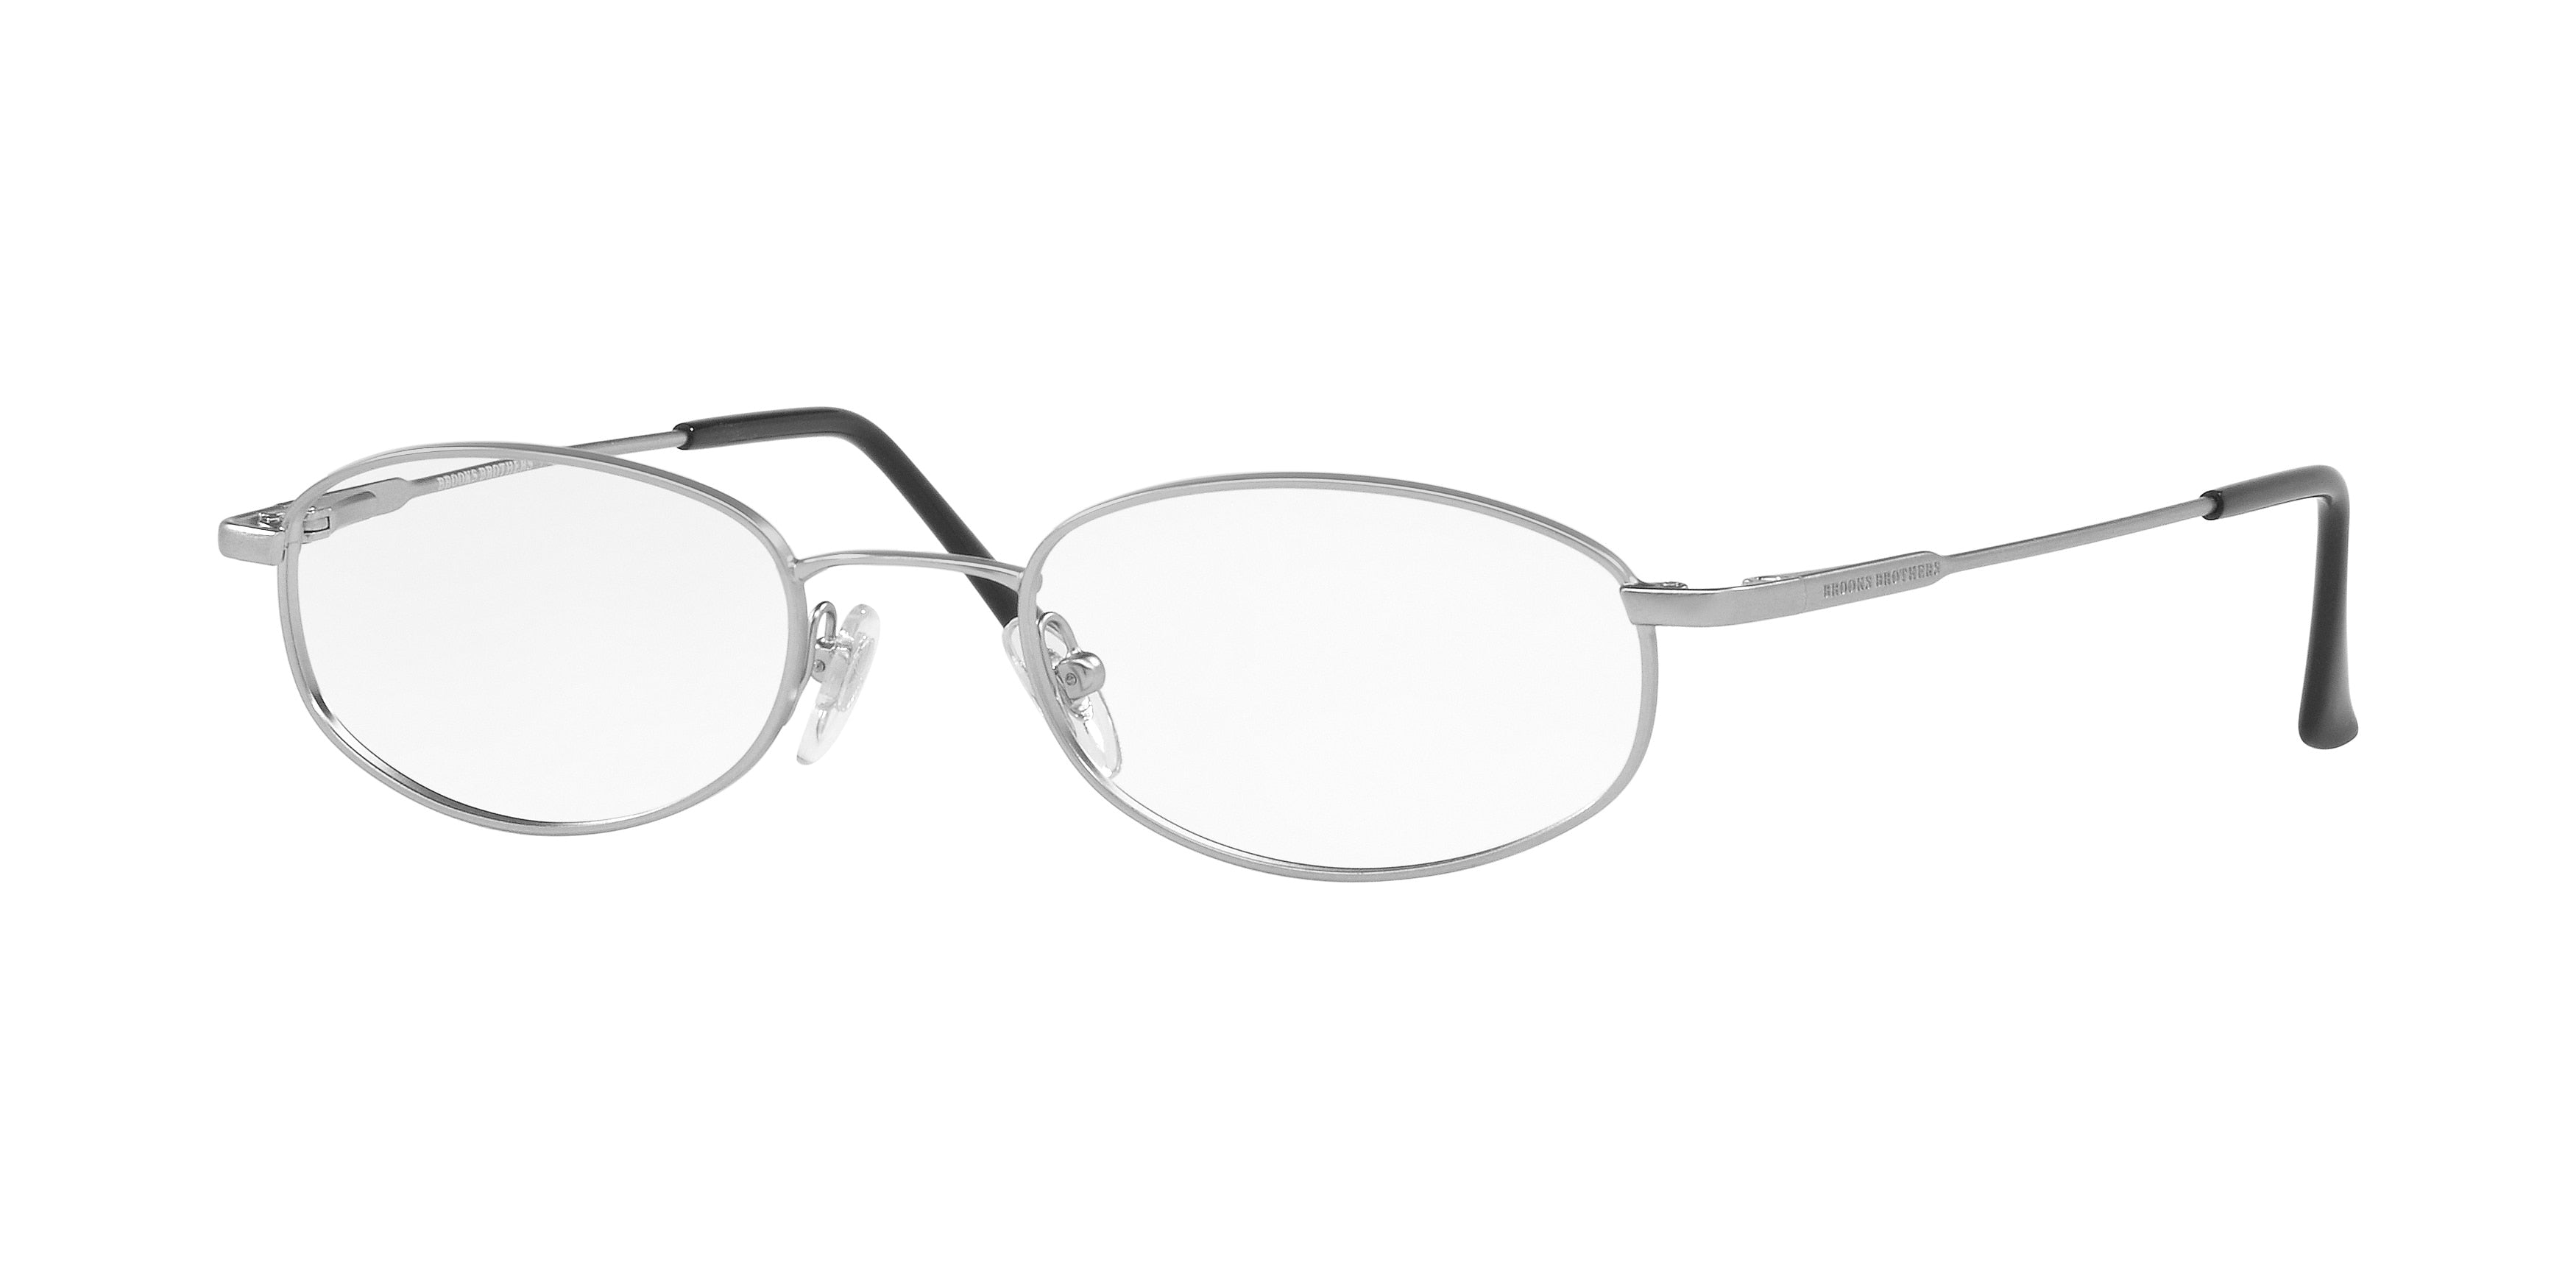 Brooks Brothers BB491 Oval Eyeglasses  1002-Brushed Silver 52-135-19 - Color Map Silver